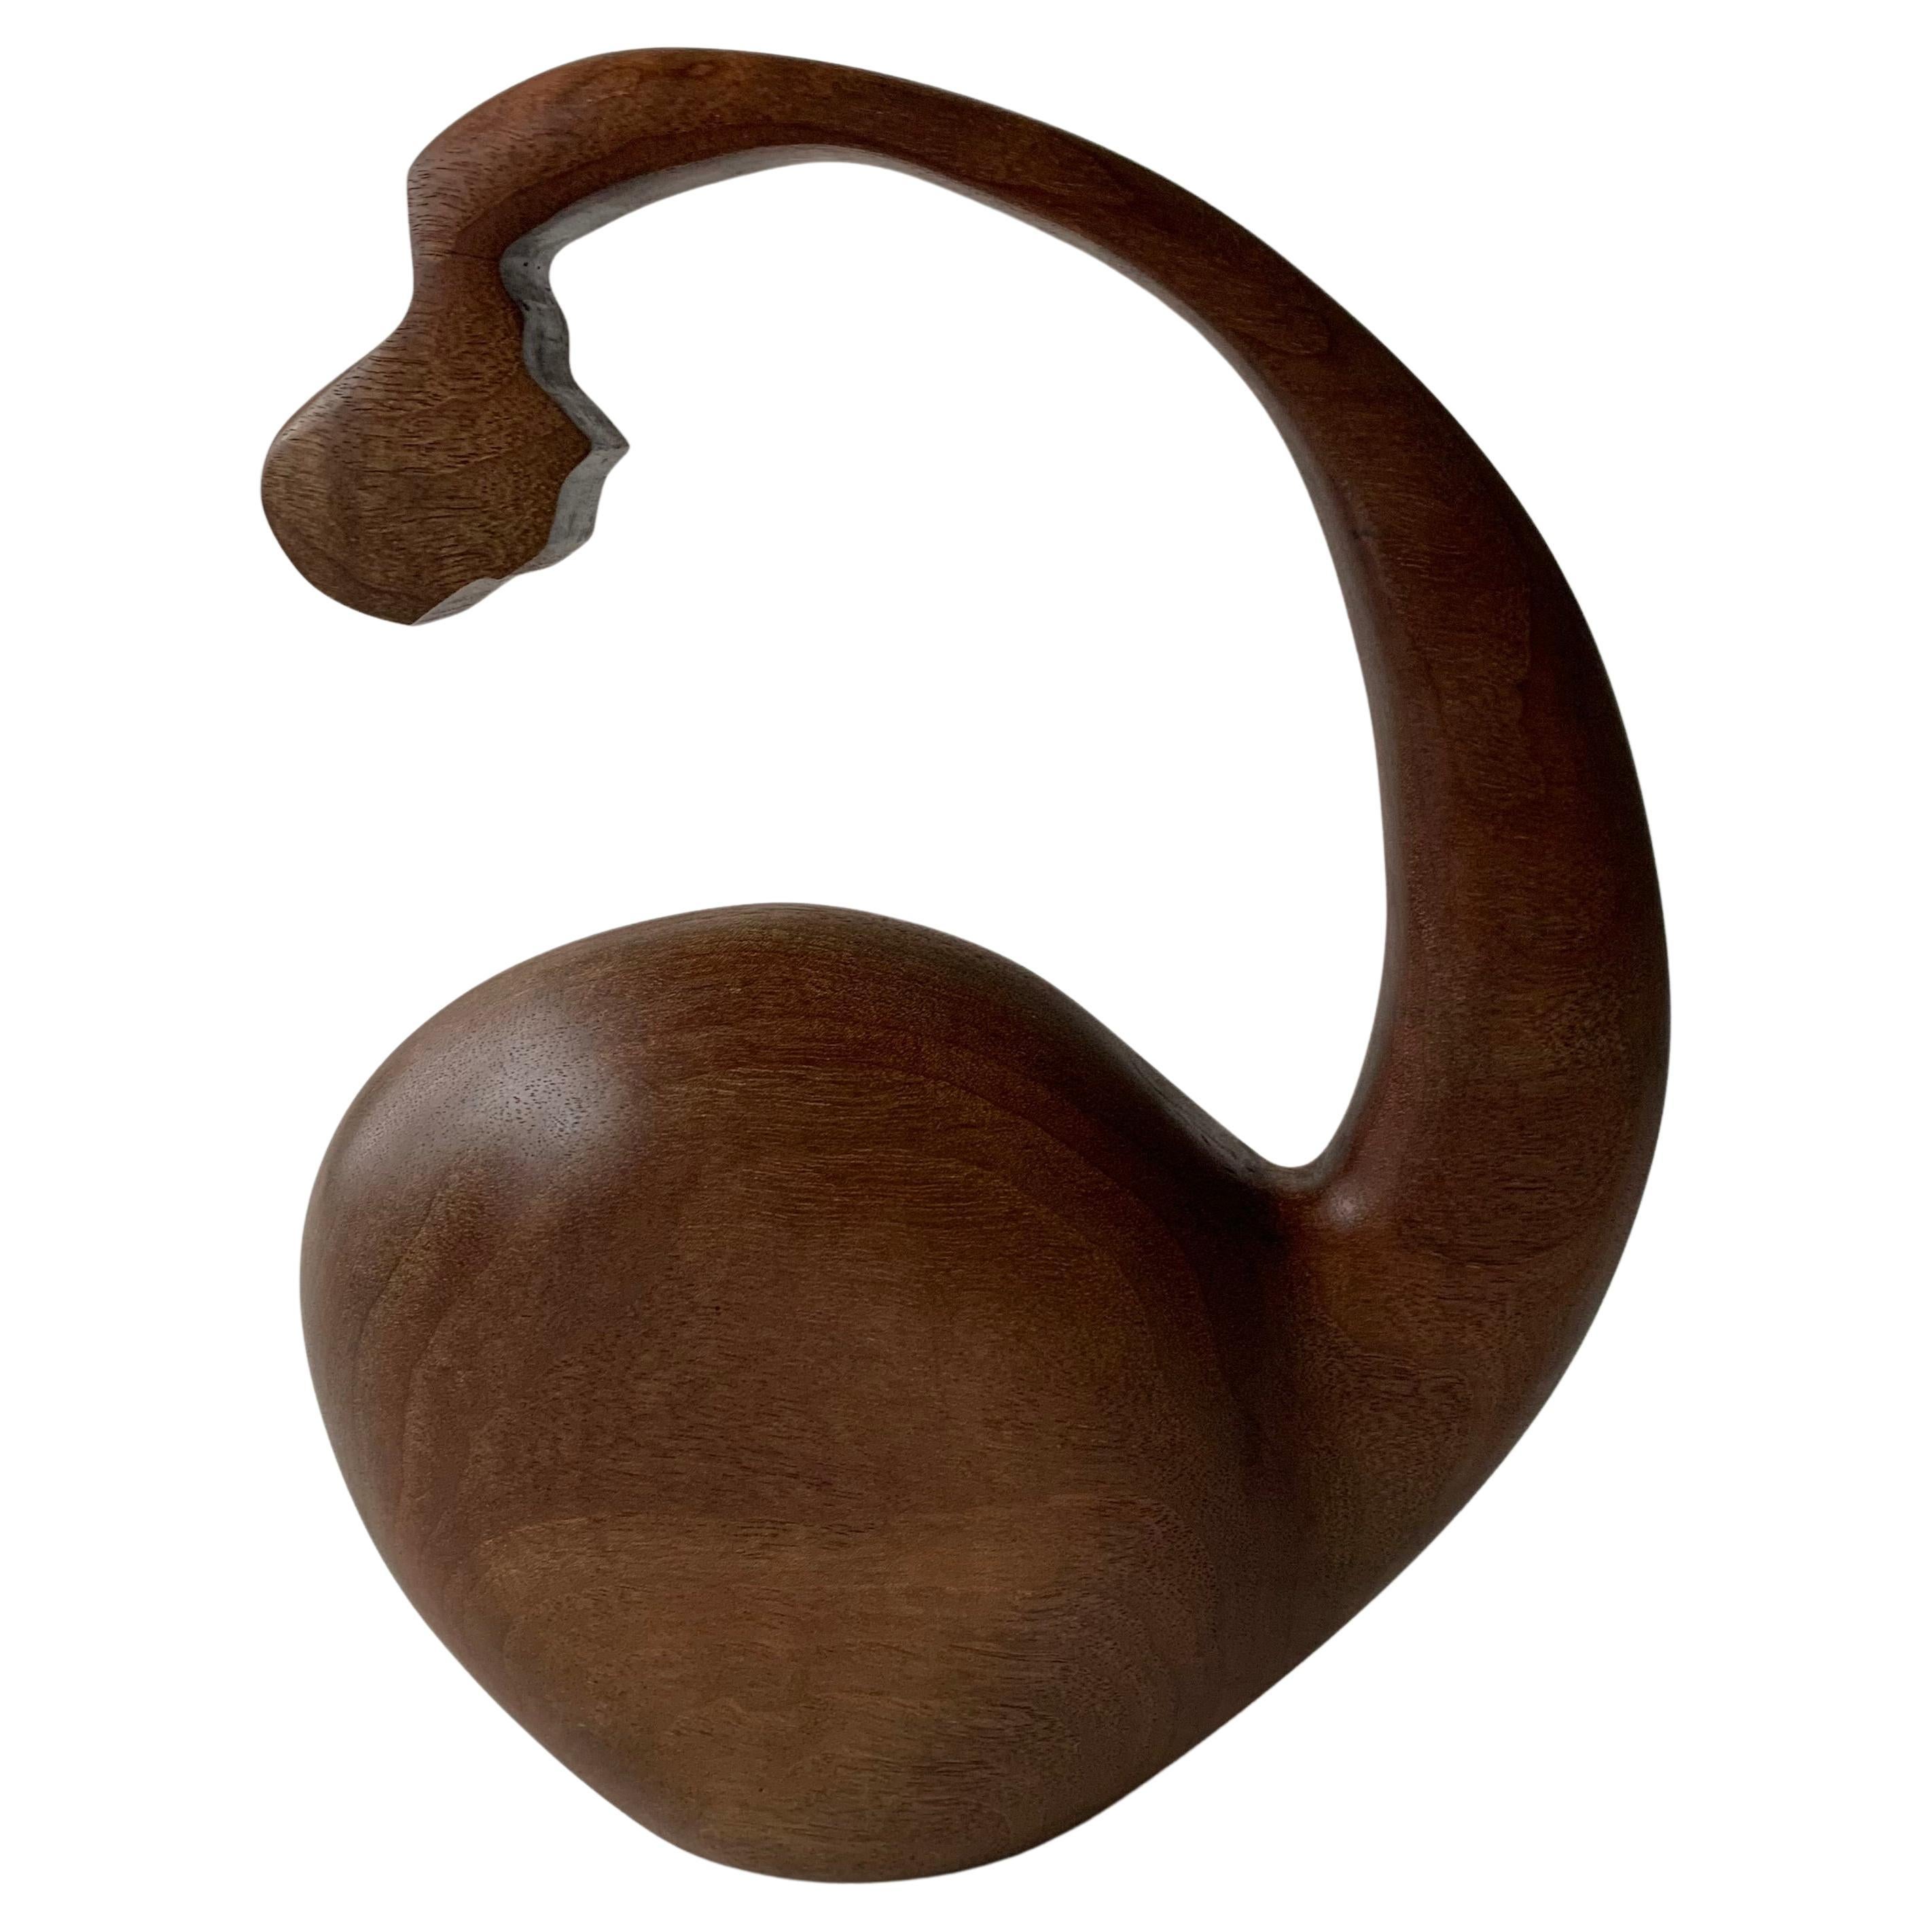 "Amused", Geometric Abstract Walnut Wood Sculpture, Warm Natural Wood Finish For Sale